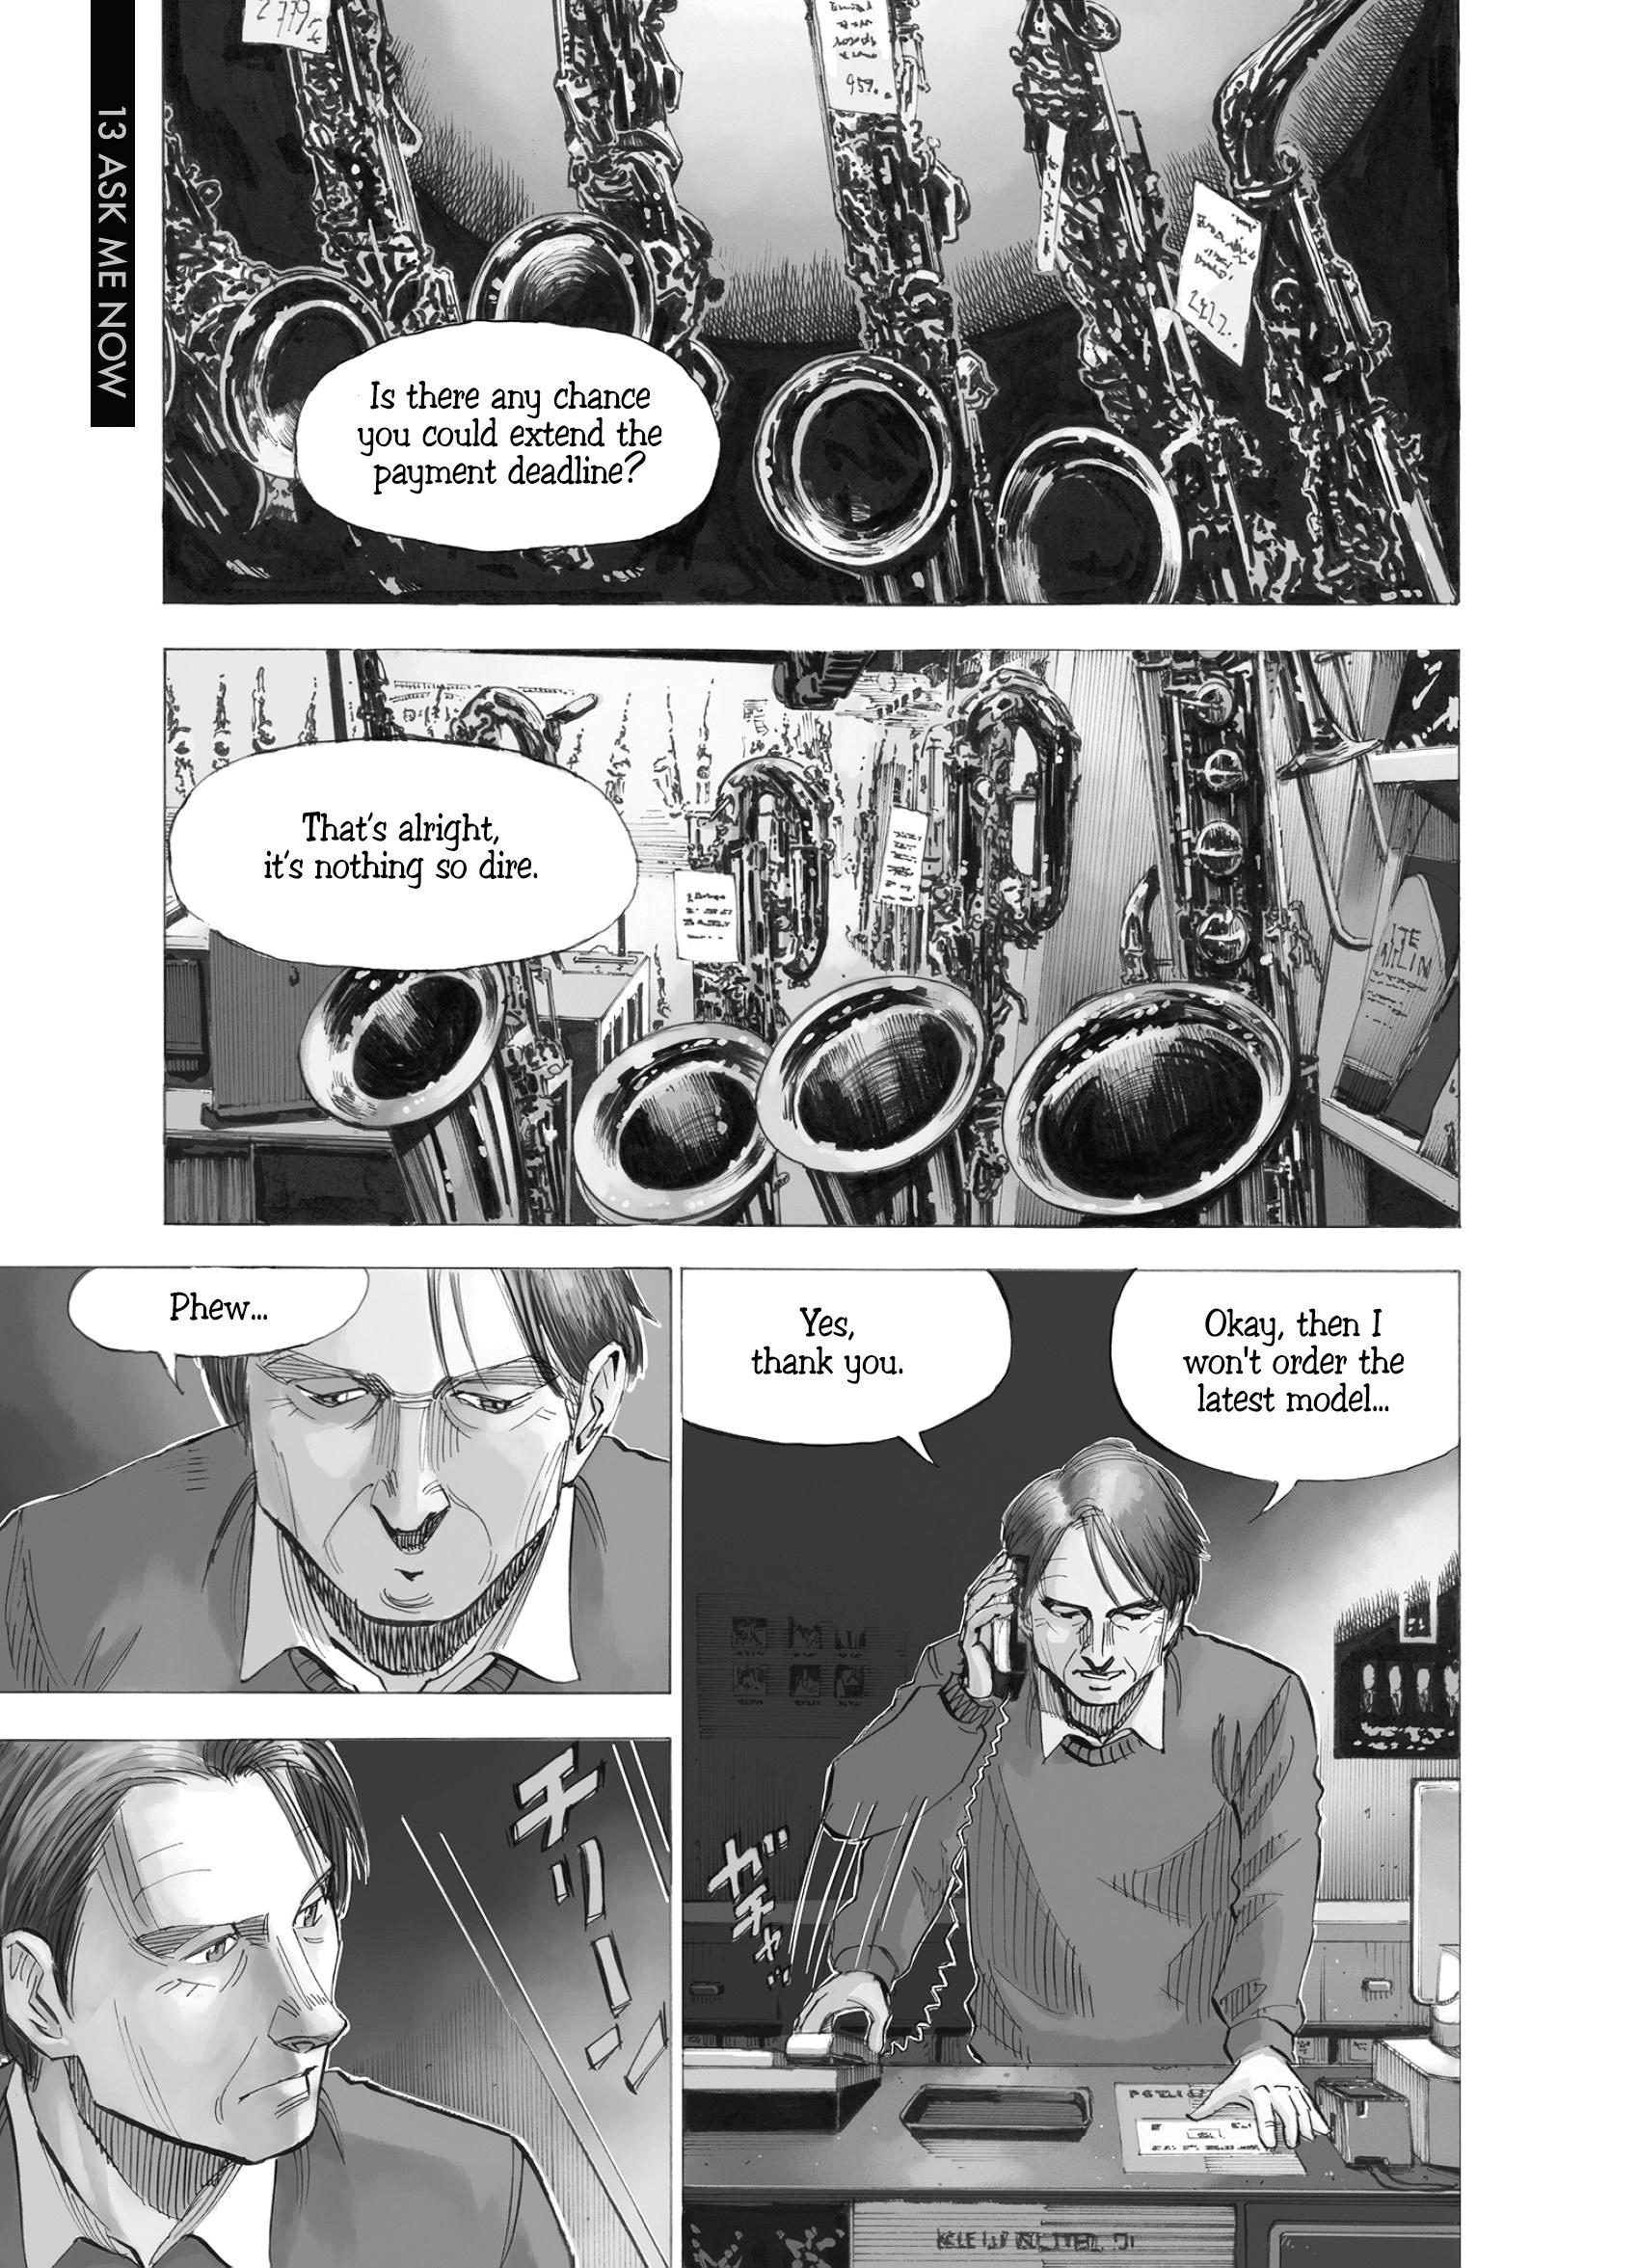 Read Blue Giant Supreme Vol.2 Chapter 13: Ask Me Now - Manganelo